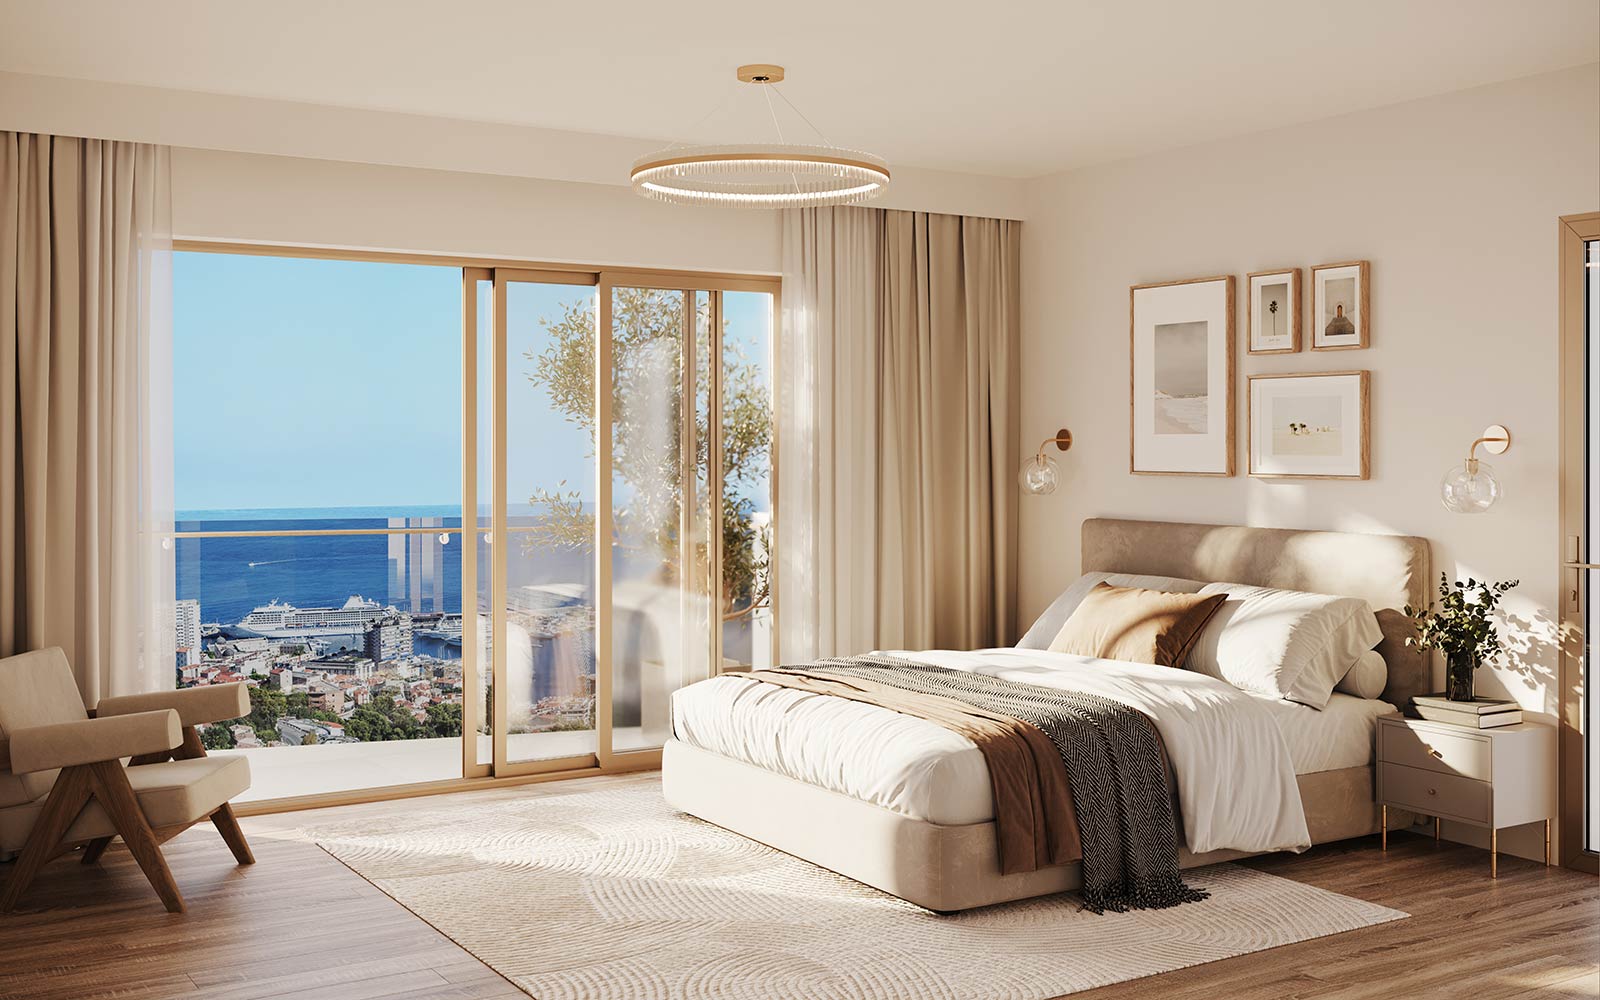 Here is a room of the real estate program 29 Beausoleil in Monaco.